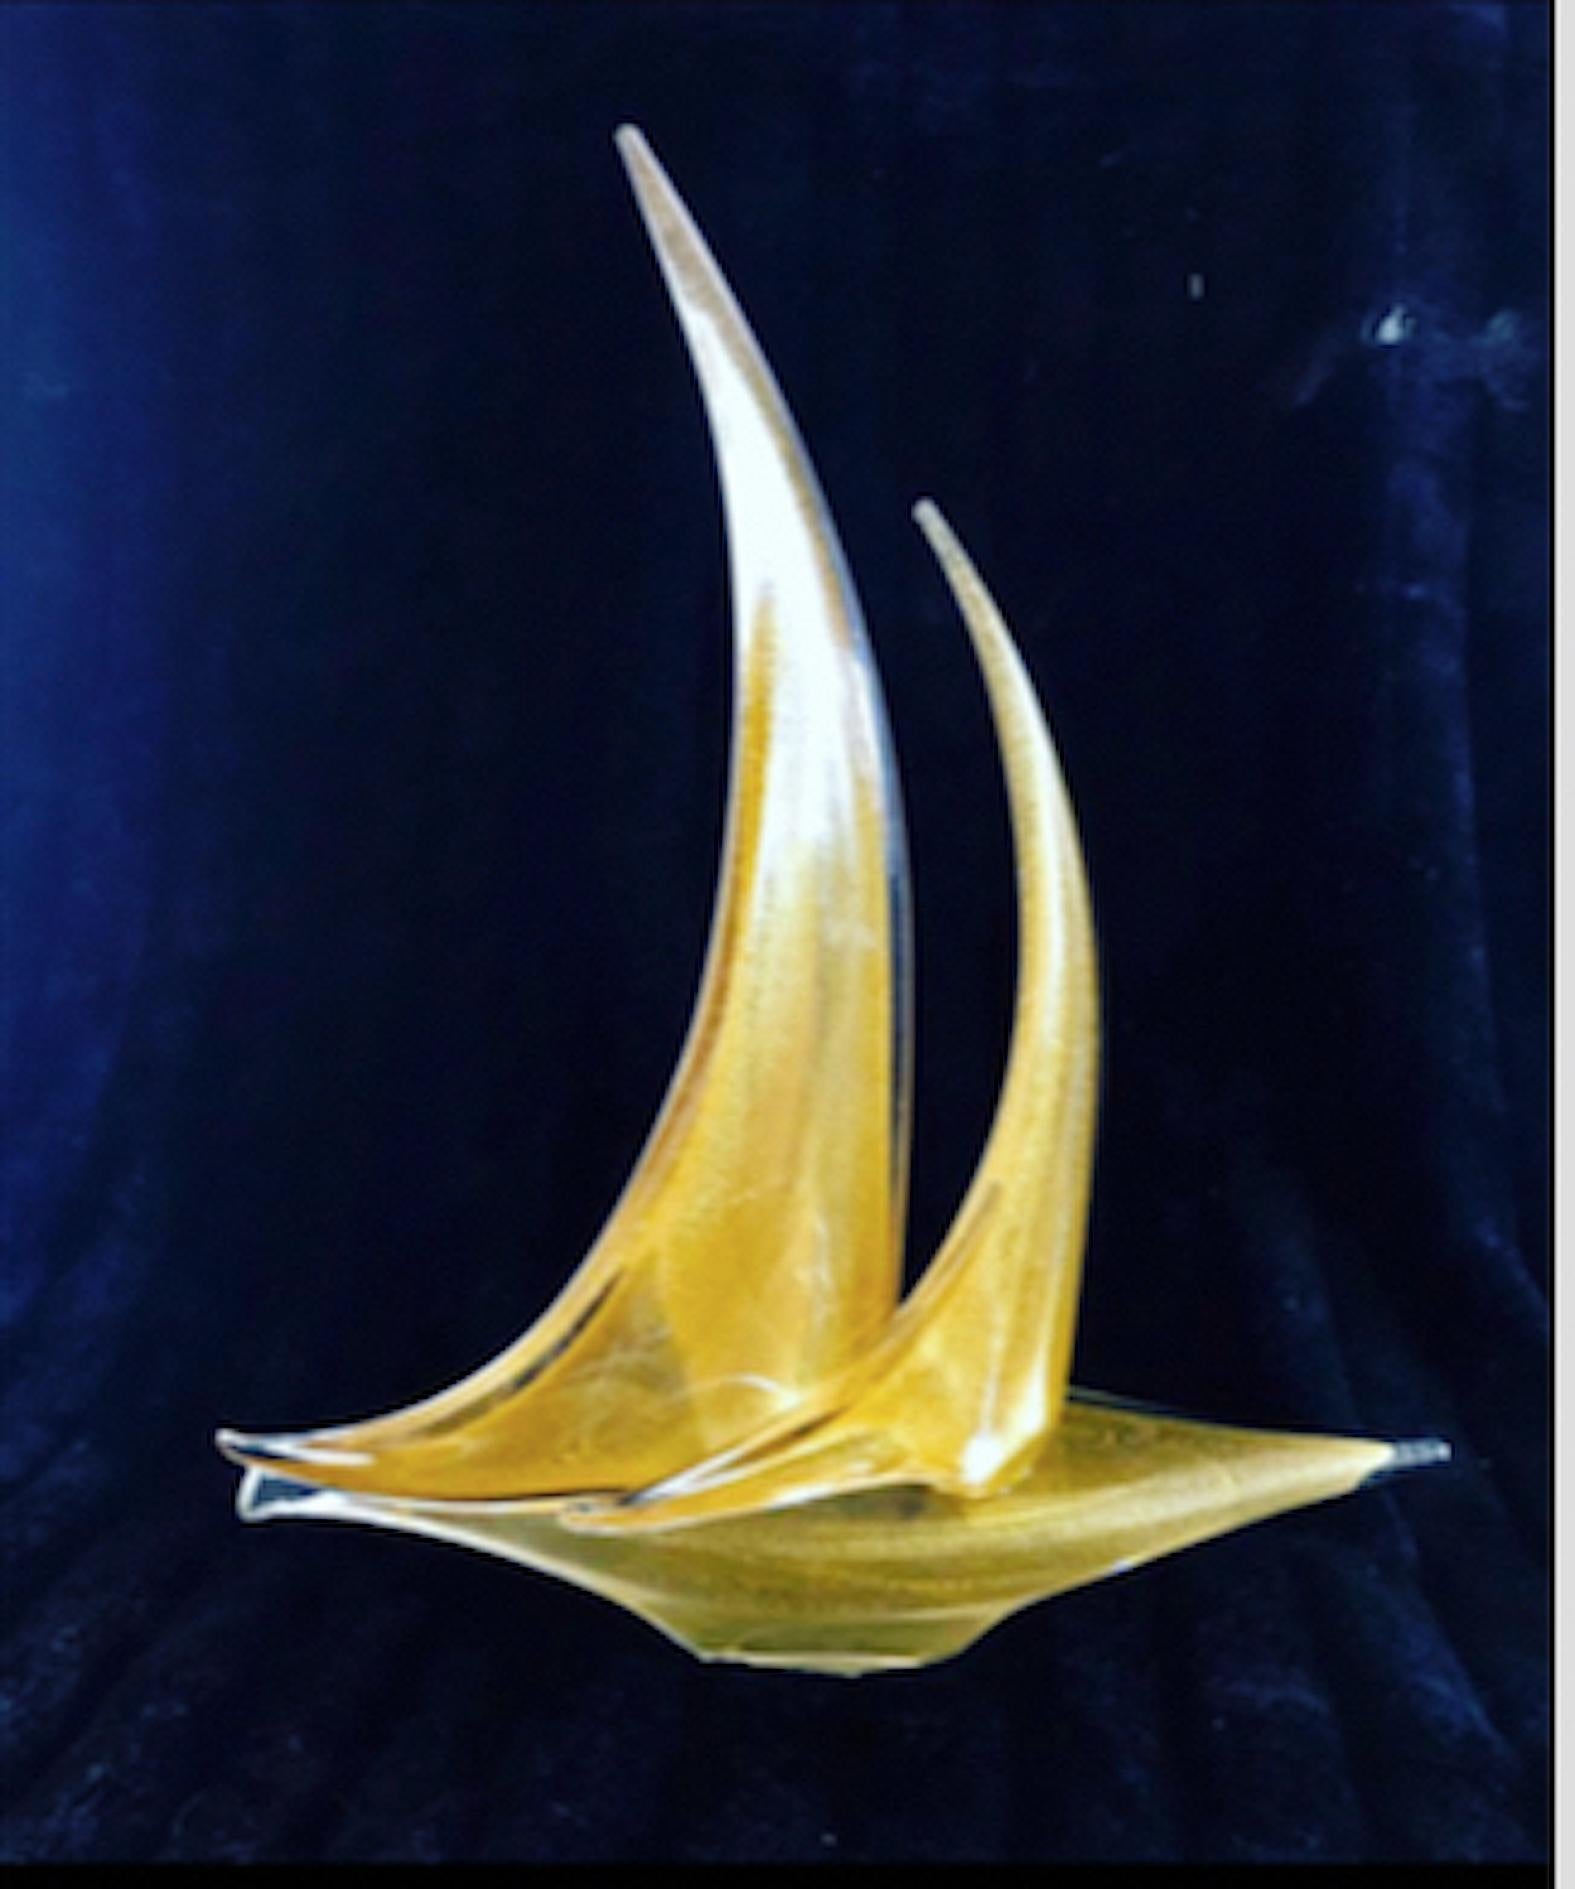 Exceptional Seguso sailing boat with incrustation gold glass Murano. The Design and the quality of the glass make this piece the best of the italian Design.
This unique Seguso sailing boat in gold glass murano are exceptional.

discount shipping